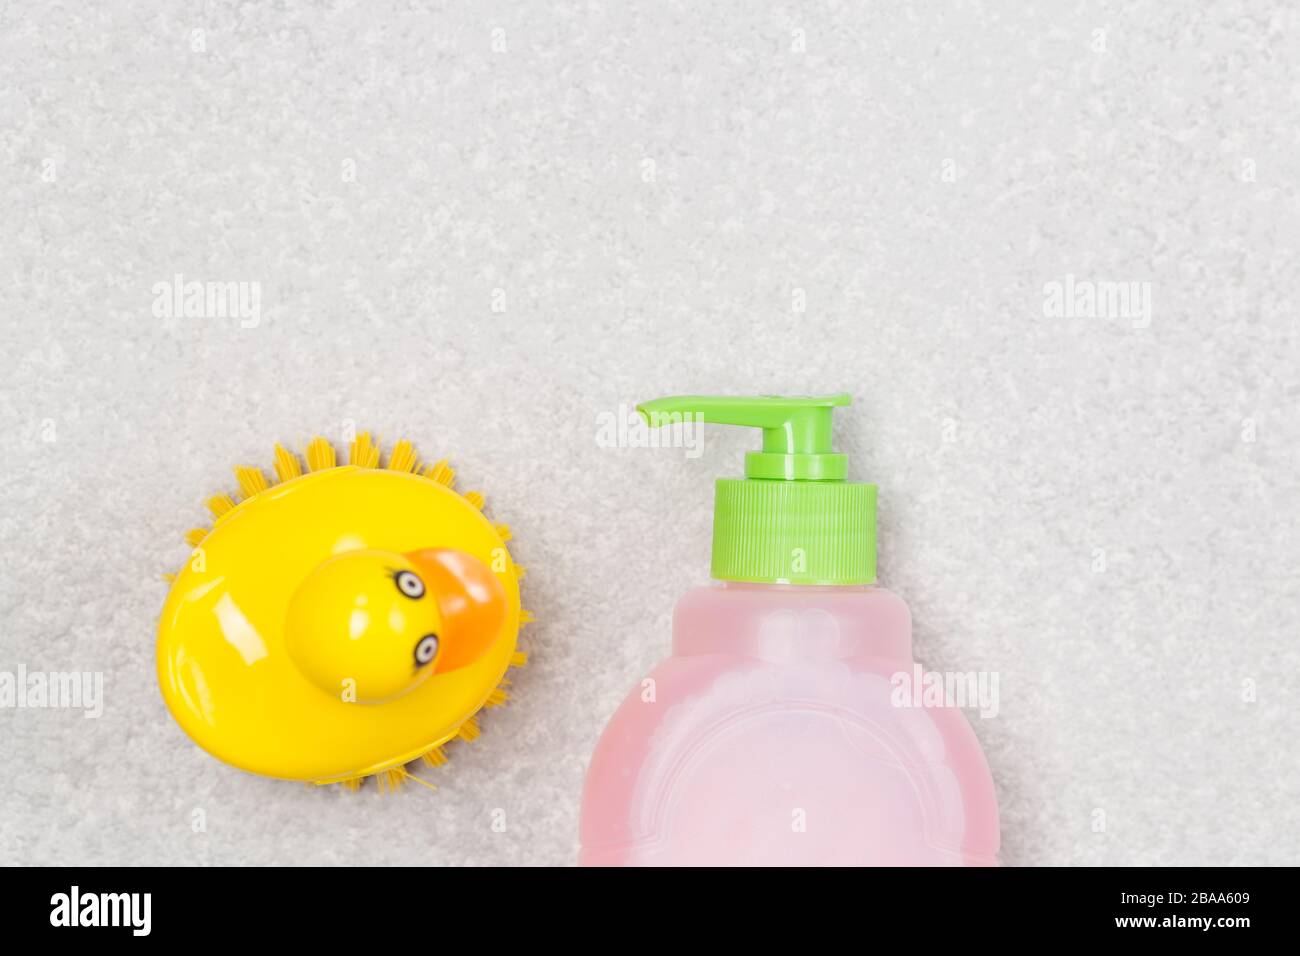 https://c8.alamy.com/comp/2BAA609/plastic-bootle-of-liquid-soap-shampoo-with-dispenser-and-brush-closeup-on-white-background-free-space-washing-hands-2BAA609.jpg